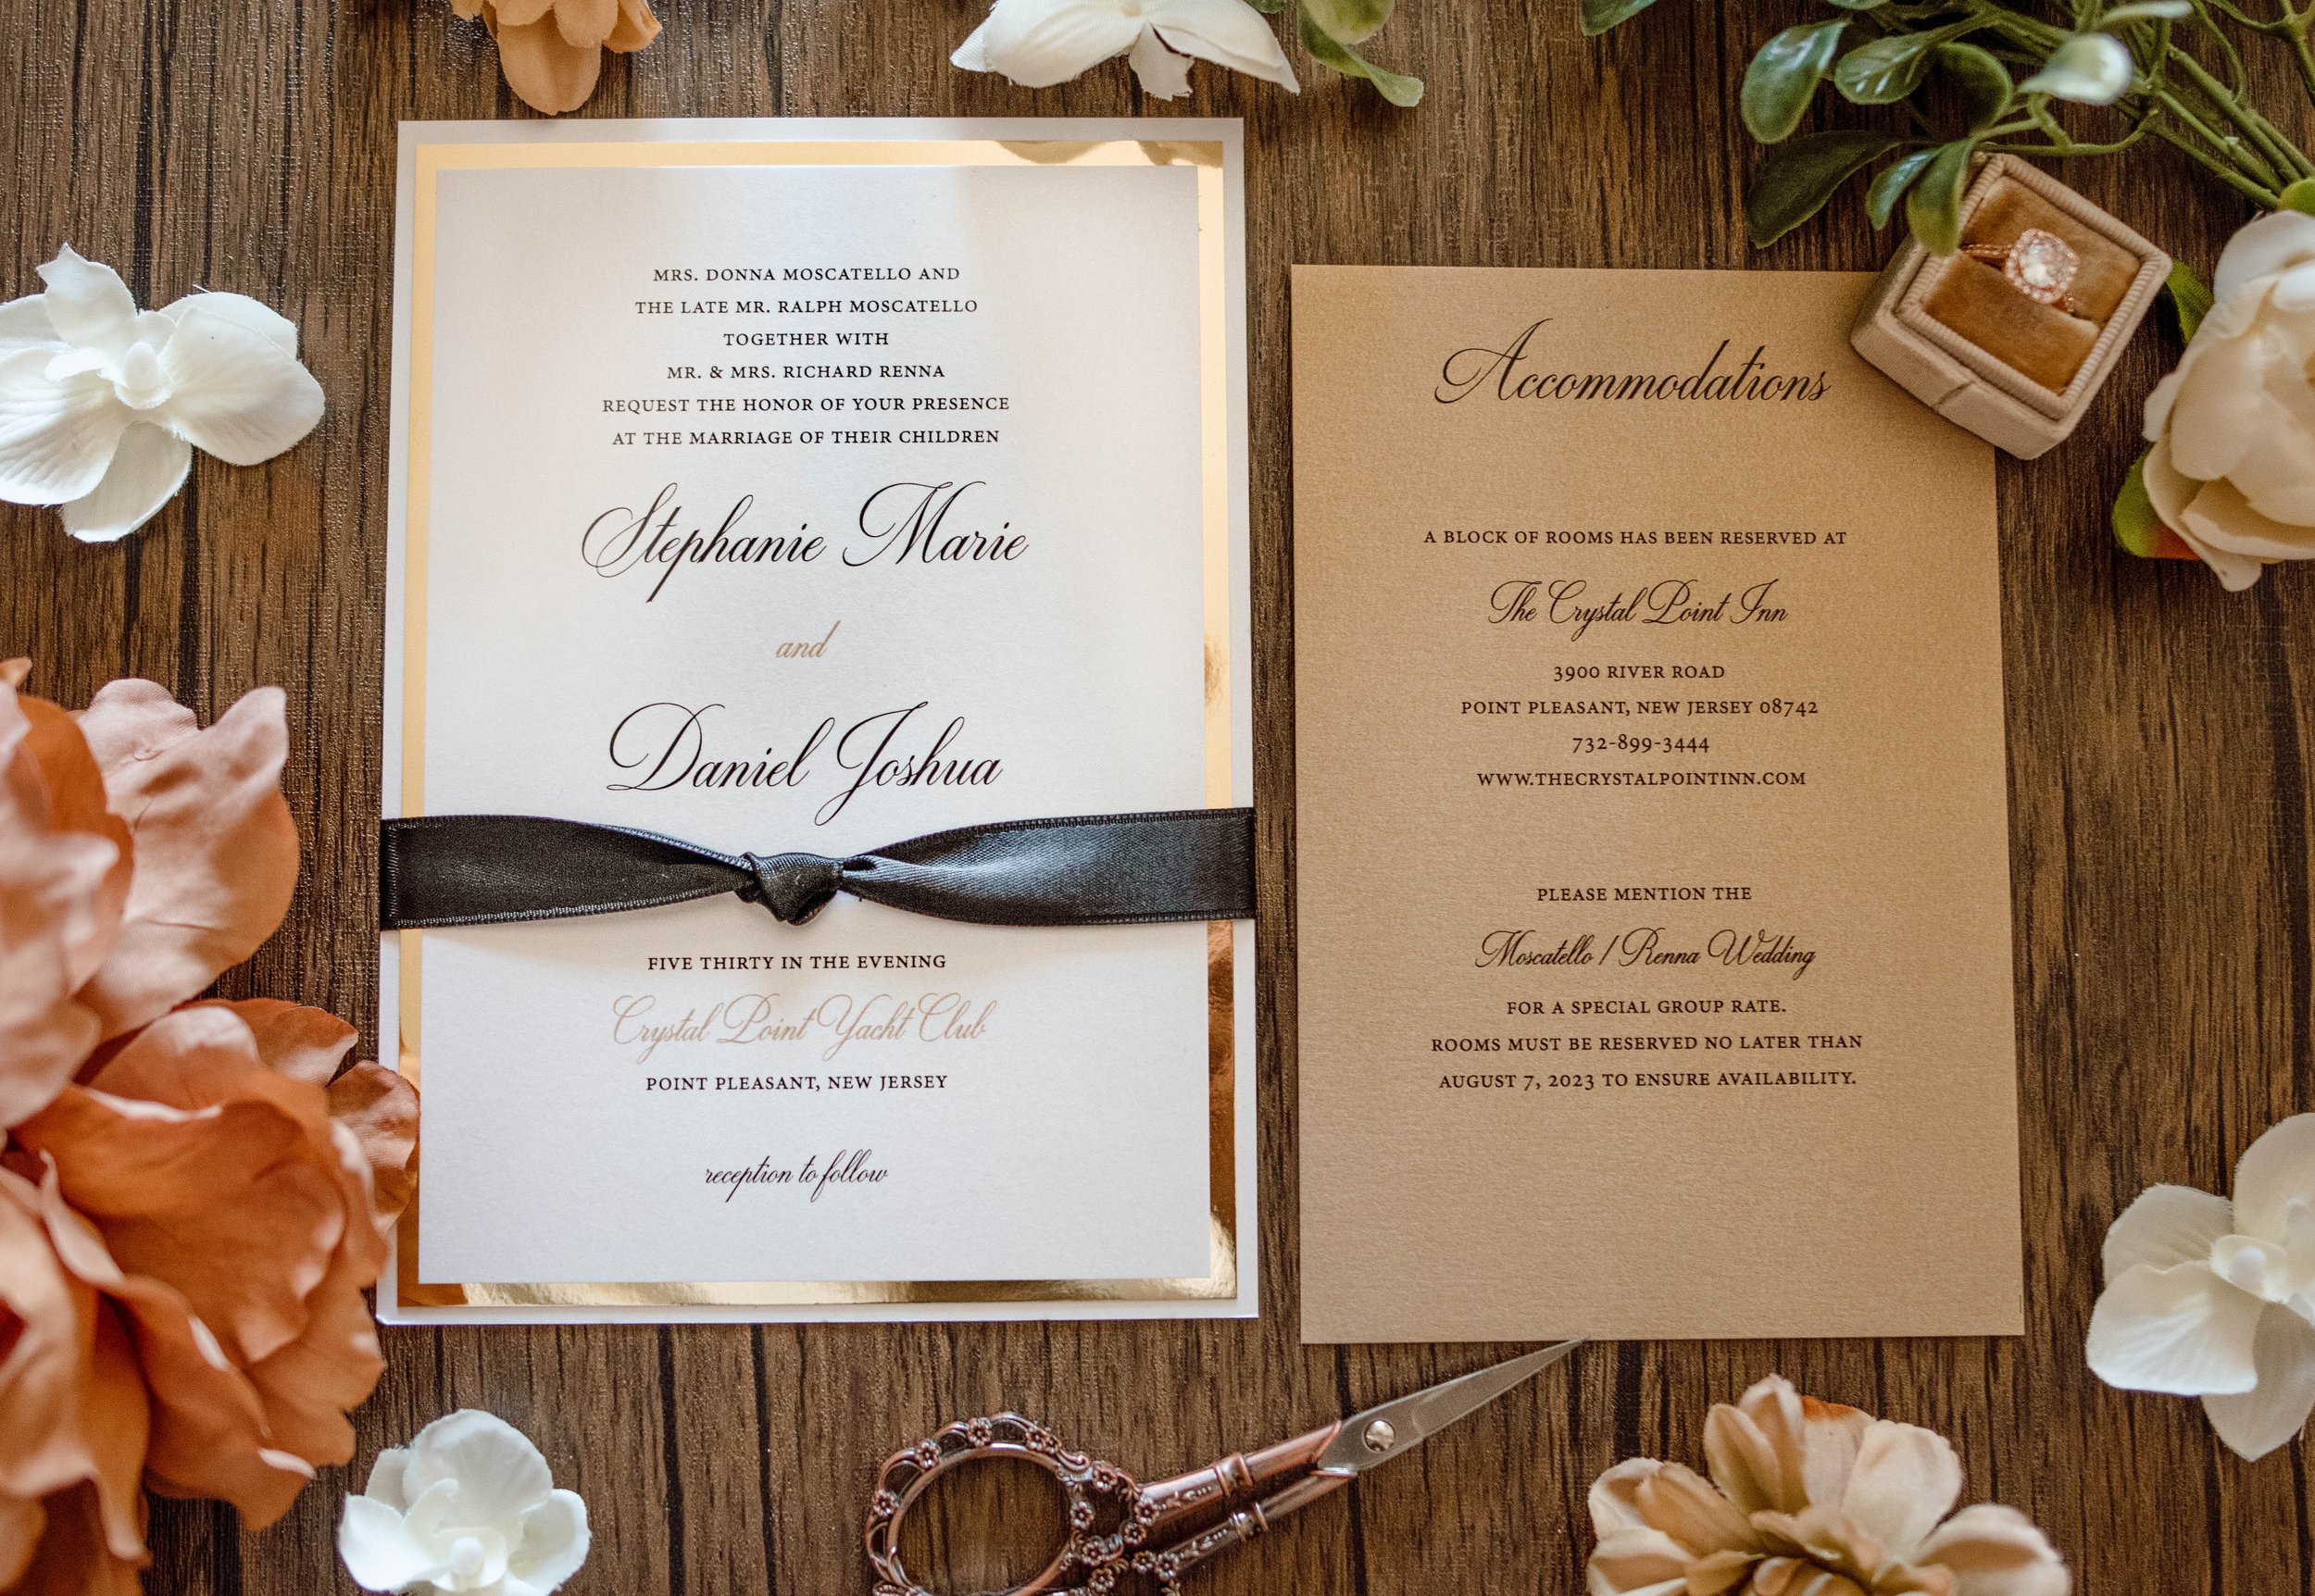 Wedding Invitation Cards with Floral Borders and Gold Foil